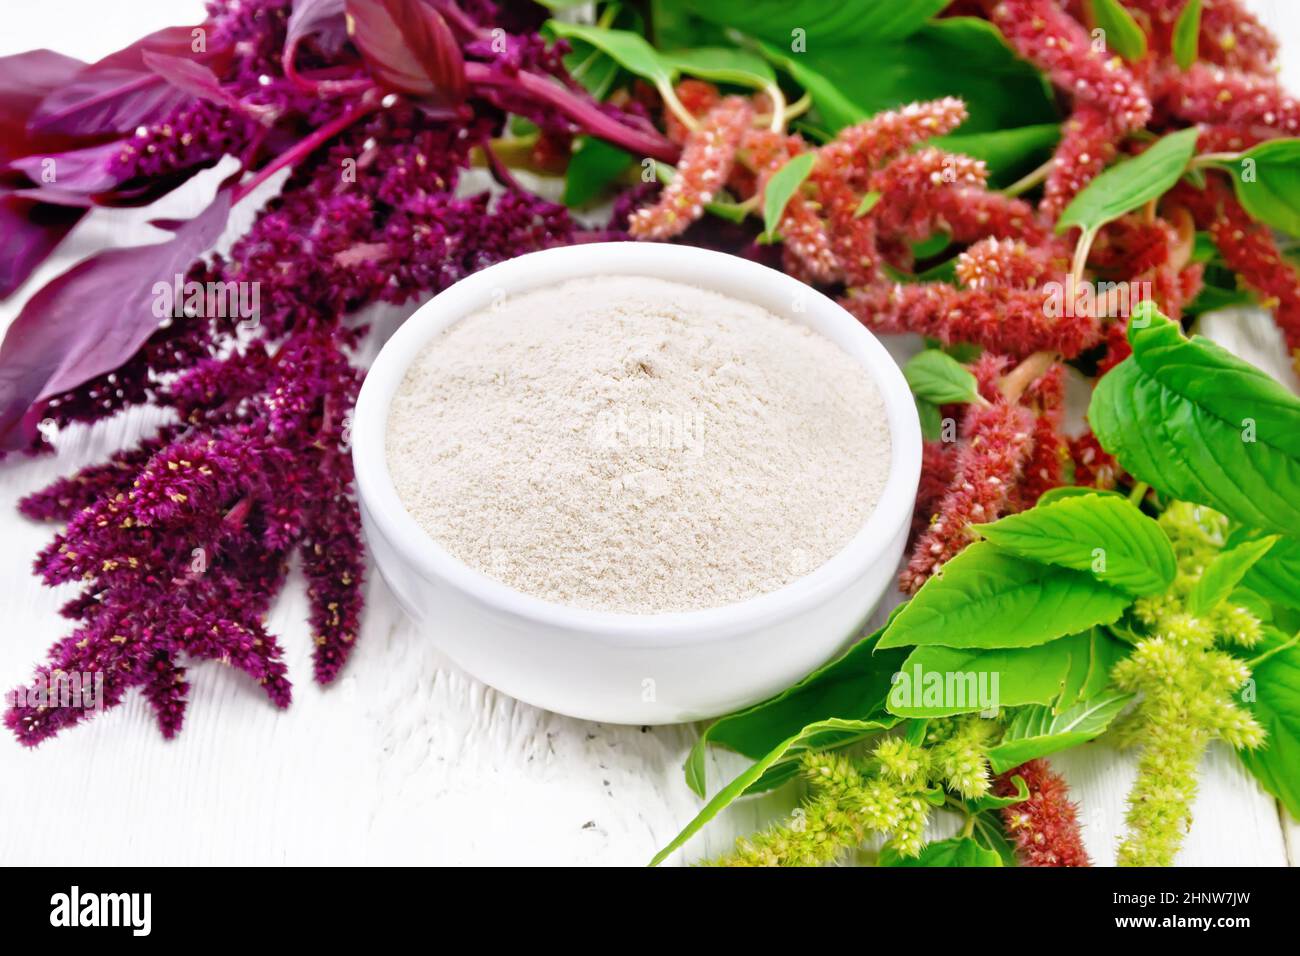 Amaranth flour in a bowl, brown, green and purple flowers and leaves of a plant on the background of light wooden board Stock Photo